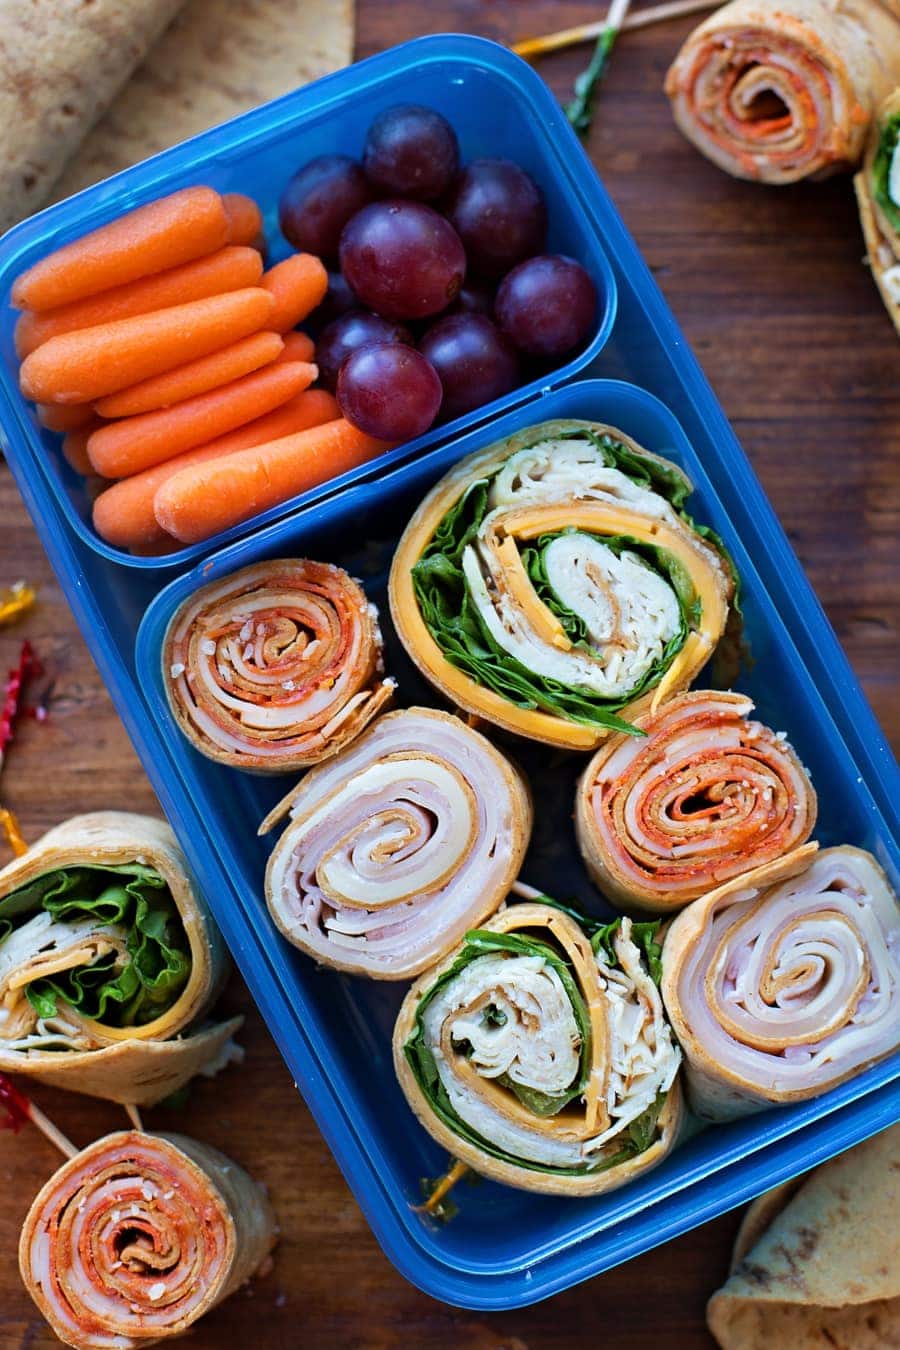 rolled flatbread pinwheels in a container with carrots and grapes